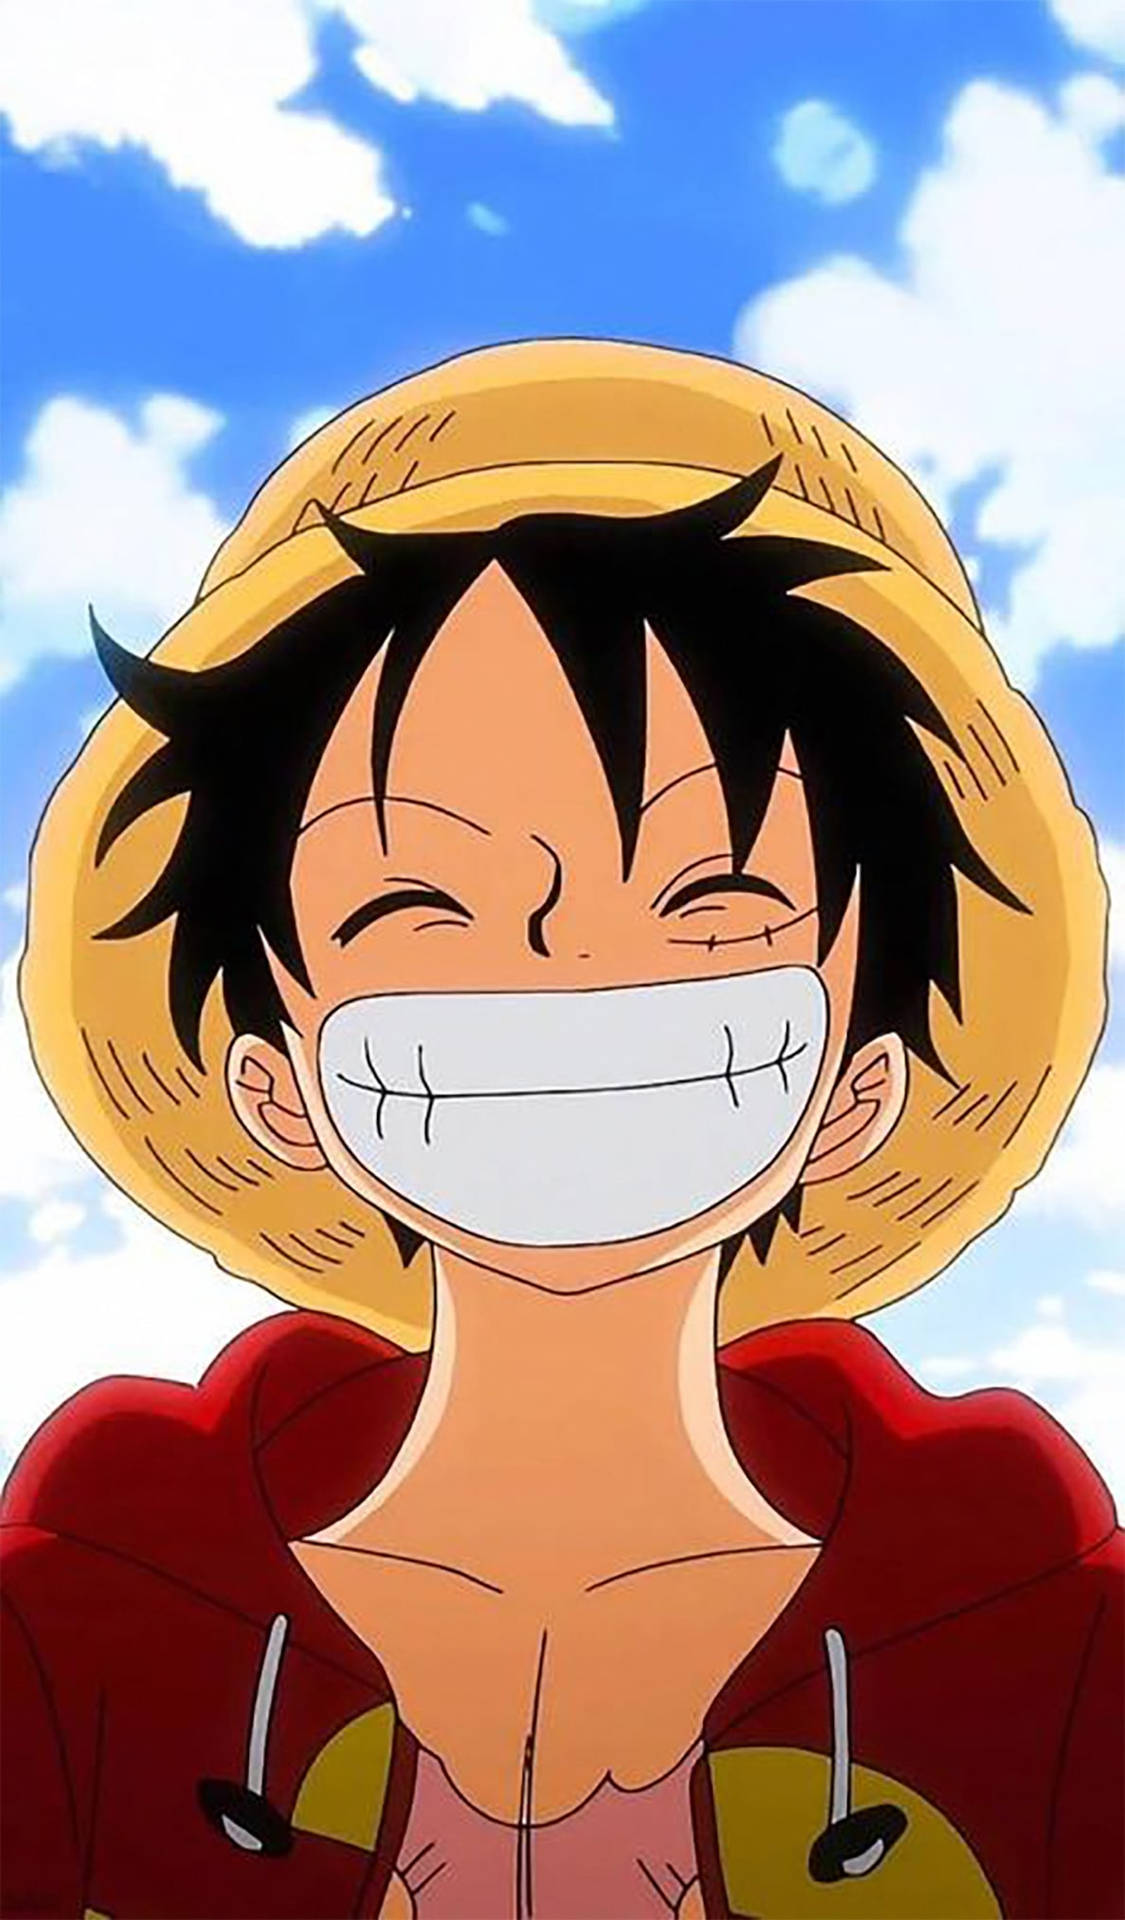 Cloudy Sky And Luffy Smile Wallpaper